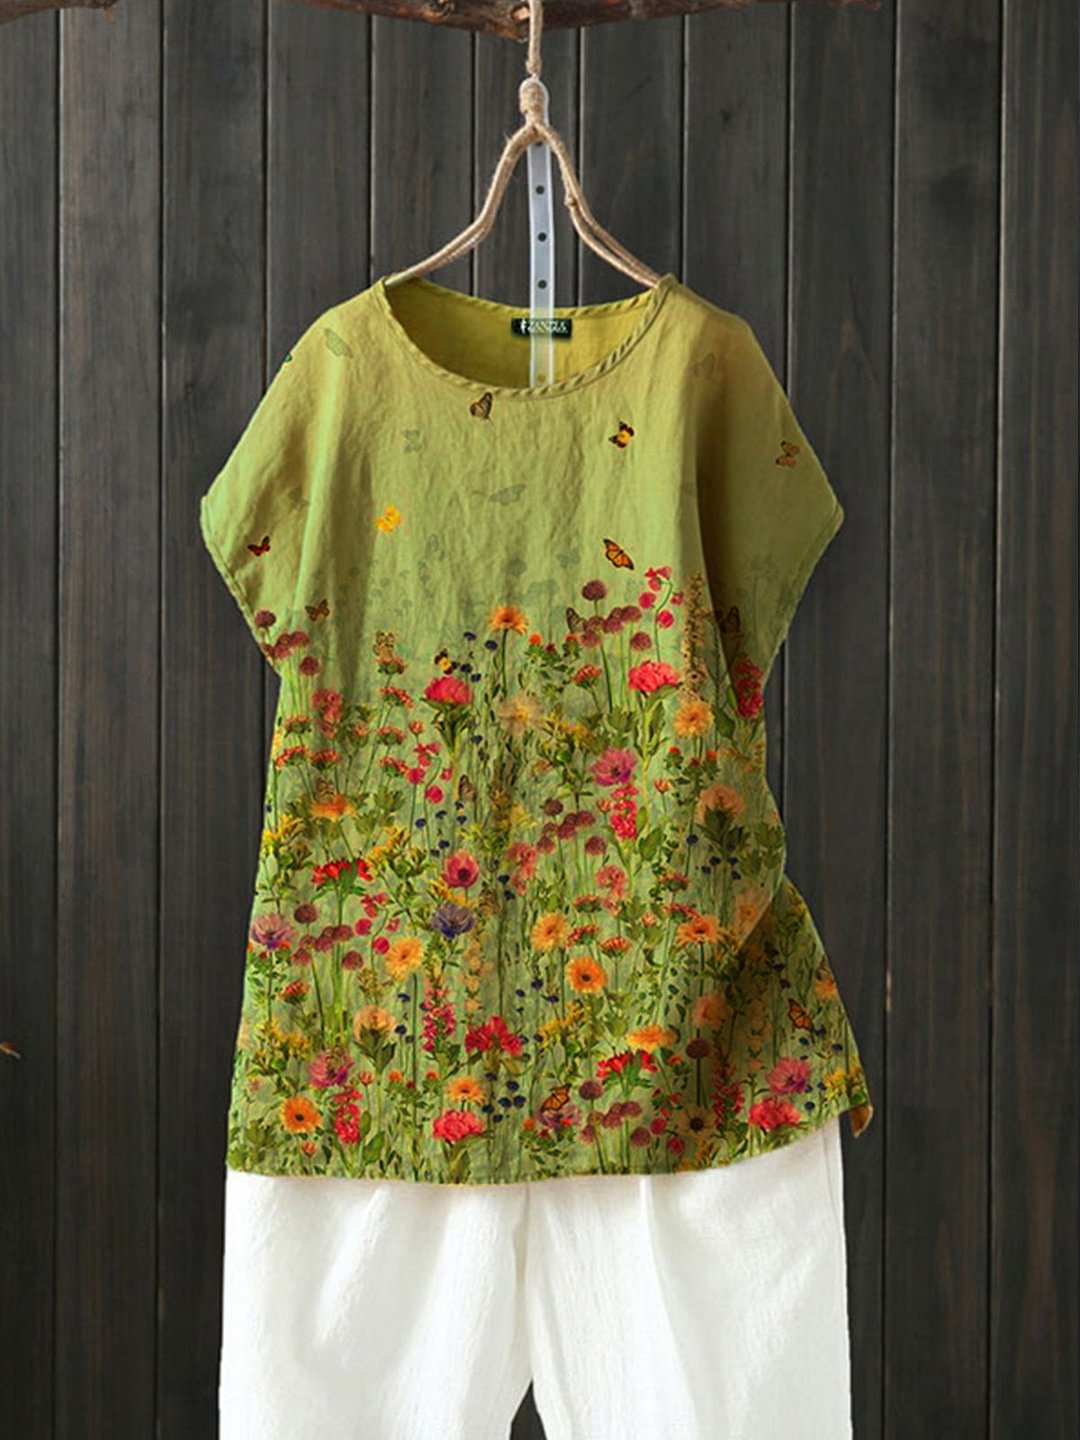 Flower Casual Cotton-Blend Floral Shirts & Tops - VSMEE